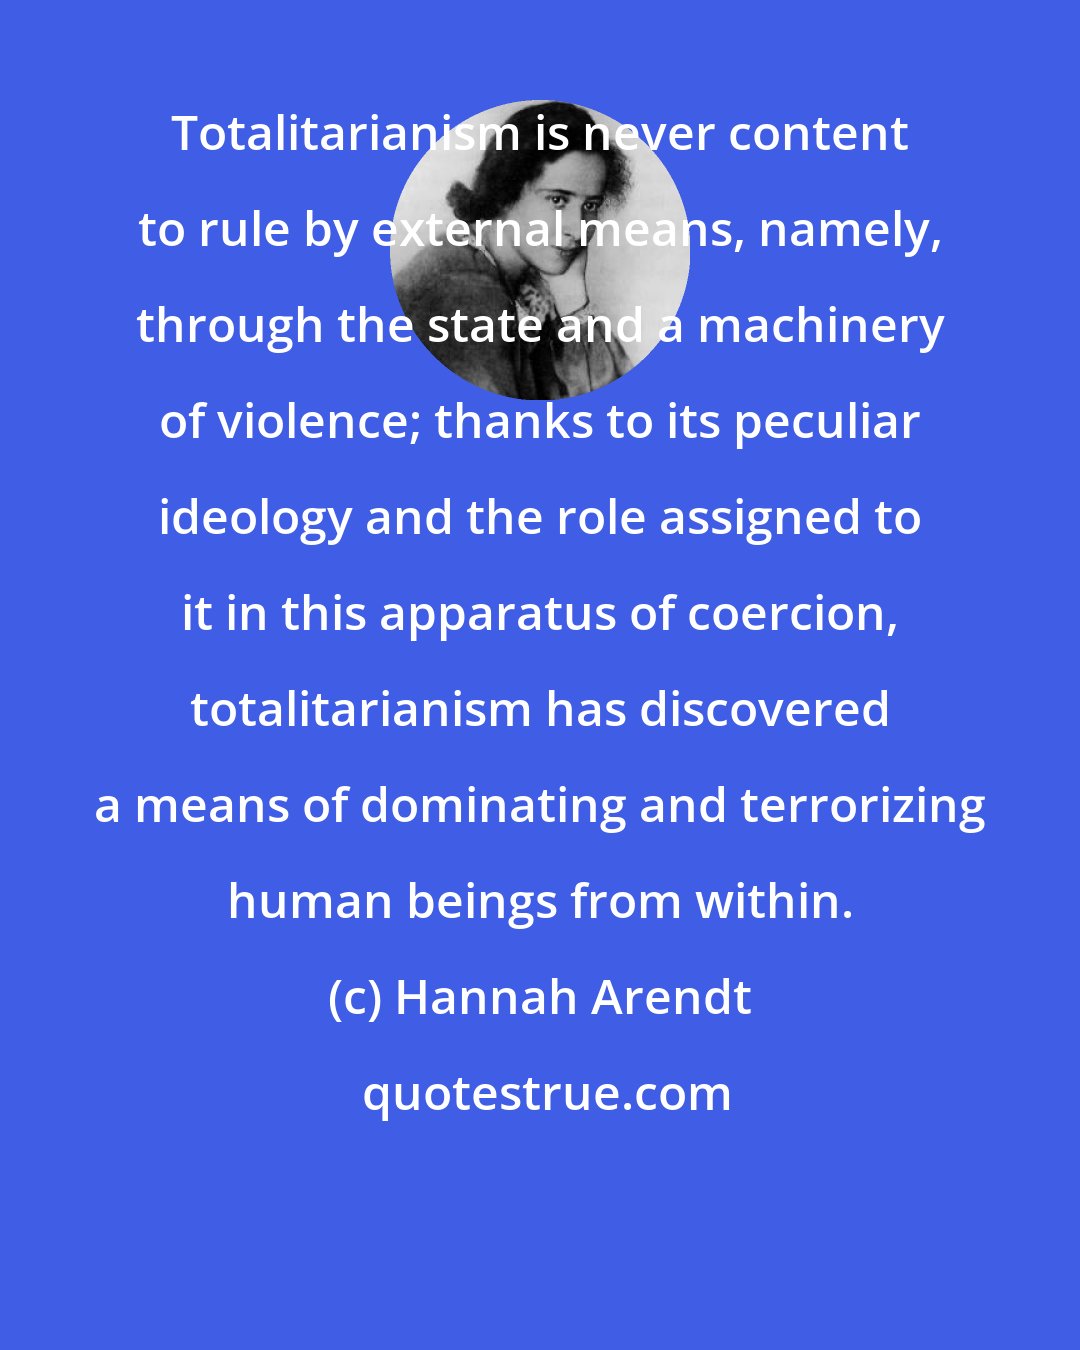 Hannah Arendt: Totalitarianism is never content to rule by external means, namely, through the state and a machinery of violence; thanks to its peculiar ideology and the role assigned to it in this apparatus of coercion, totalitarianism has discovered a means of dominating and terrorizing human beings from within.